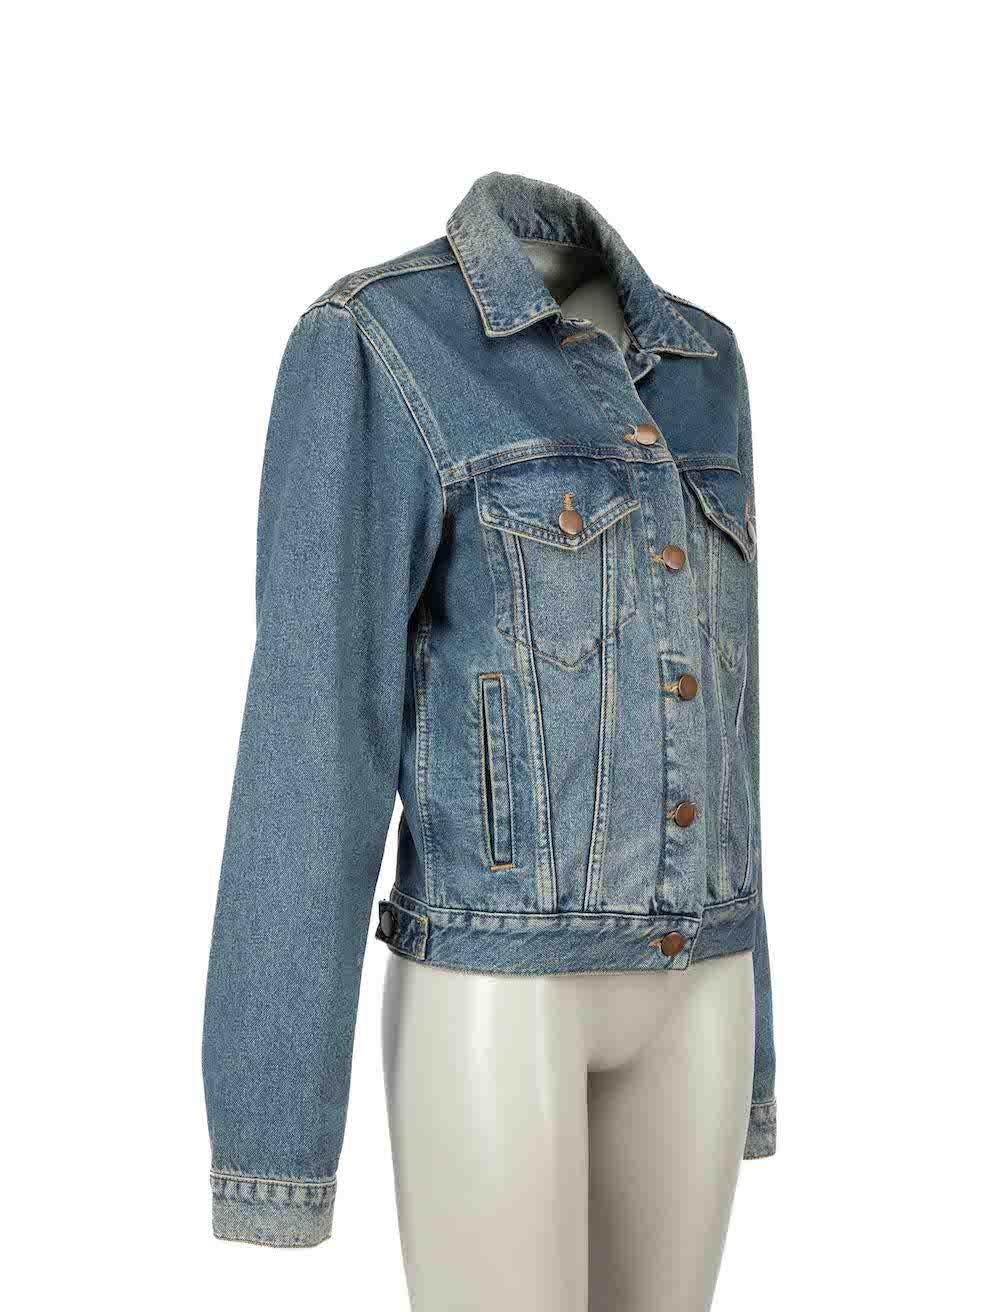 CONDITION is Very good. Hardly any visible wear to jacket is evident on this used Raey designer resale item.
  
Details
Blue
Cotton
Denim jacket
Button up fastening
Buttoned cuffs
4x Front pockets
  
Made in Turkey
  
Composition
100% Cotton
  
Care